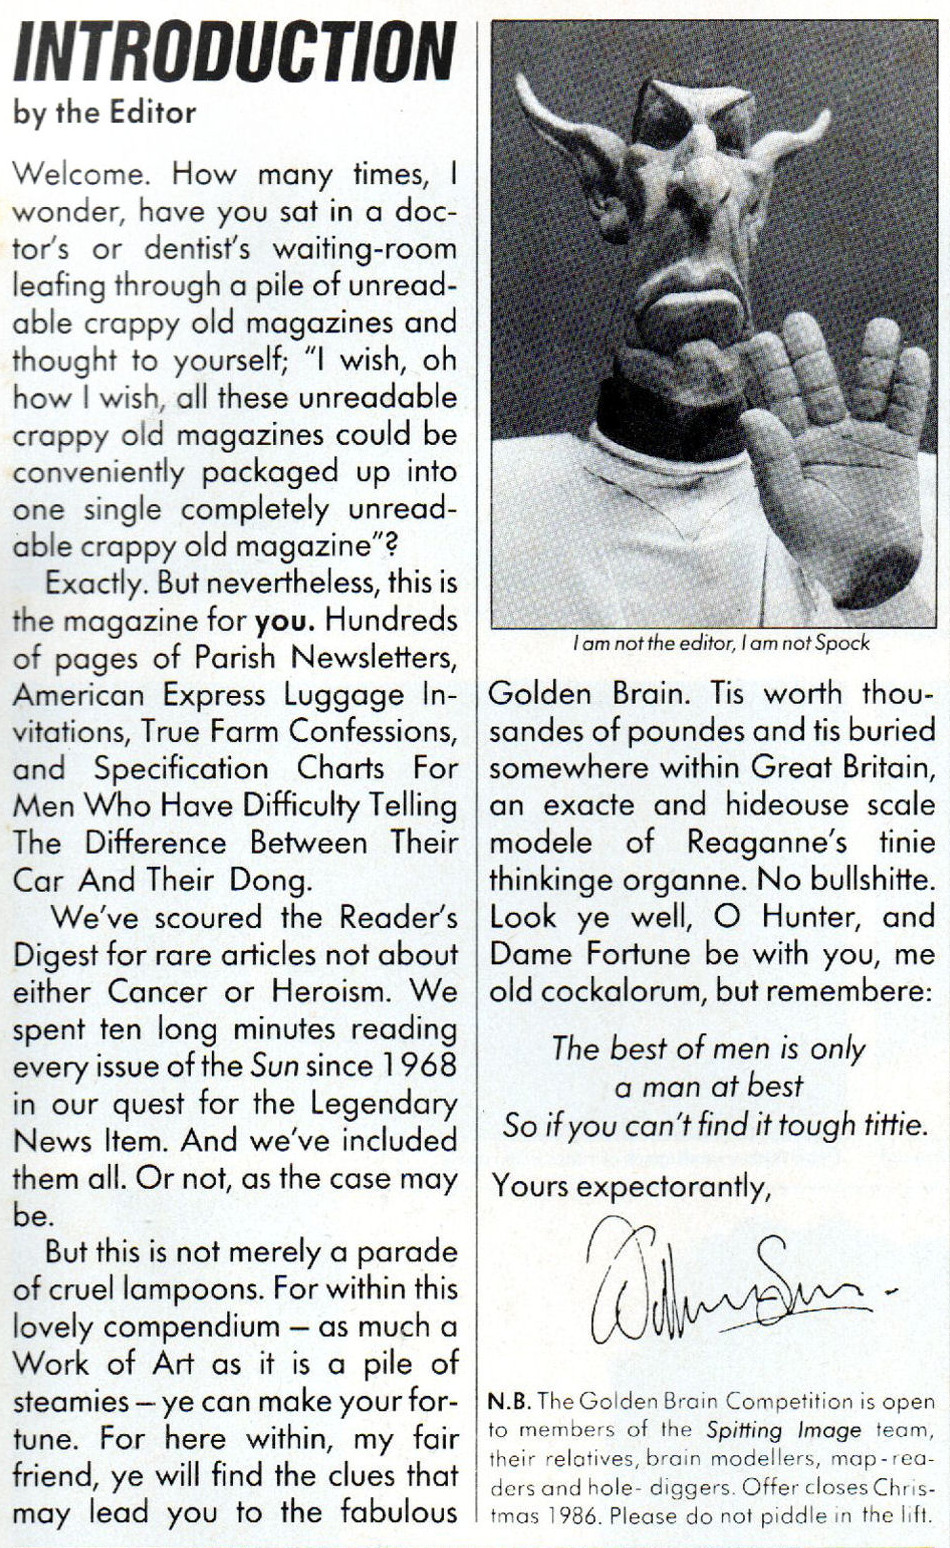 

Introduction by the Editor
Welcome. How many times, I wonder, have you sat in a doctor's or dentist's waiting-room leafing through a pile of unreadable crappy old magazines and thought to yourself; 'I wish, oh how I wish, all these unreadable crappy old magazines could be conveniently packaged up into one single completely unreadable crappy old magazine'?

Exactly. The nevertheless, this is the magazine for you. Hundreds of pages of Parish Newsletters, American Express Luggage Invitations, True Farm Confessions, and Specification Charts For Men Who Have Difficulty Telling The Difference Between Their Car And Their Dong.

We've scoured the Reader's Digest for rare articles not about either Cancer or Heroism. We spent ten long minutes reading every issue of the Sun since 1968 in our quest for the Legendary News Item. And we've included them all. Or not, as the case may be.

But this is not merely a parade of cruel lampoons. For within this lovely compendium - as  much a Work of Art as it is a pile of steamies - ye can make your fortune. For here within, my fair friend, ye will find the clues that may lead you to the fabulous Golden Brain. Tis worth thousandes of poundes and tis buried somewhere within Great Britain, and exacte and hideouse scale modele of Reaganne's tinie thinkinge organne. No bullshitte. Look ye well, O Hunter, and Dame Fortune be with you me old cockalorum, but remembere:  

The best of men is only
a man at best
So if you can't find it tough tittie.

Yours expectorantly,

N.B. The Golden Brain Competition is open to members of the Spitting Image team, their relatives, brain modellers, map-readers and hole-diggers. Offer closes Christmas 1986. Please do not piddle in the lift.